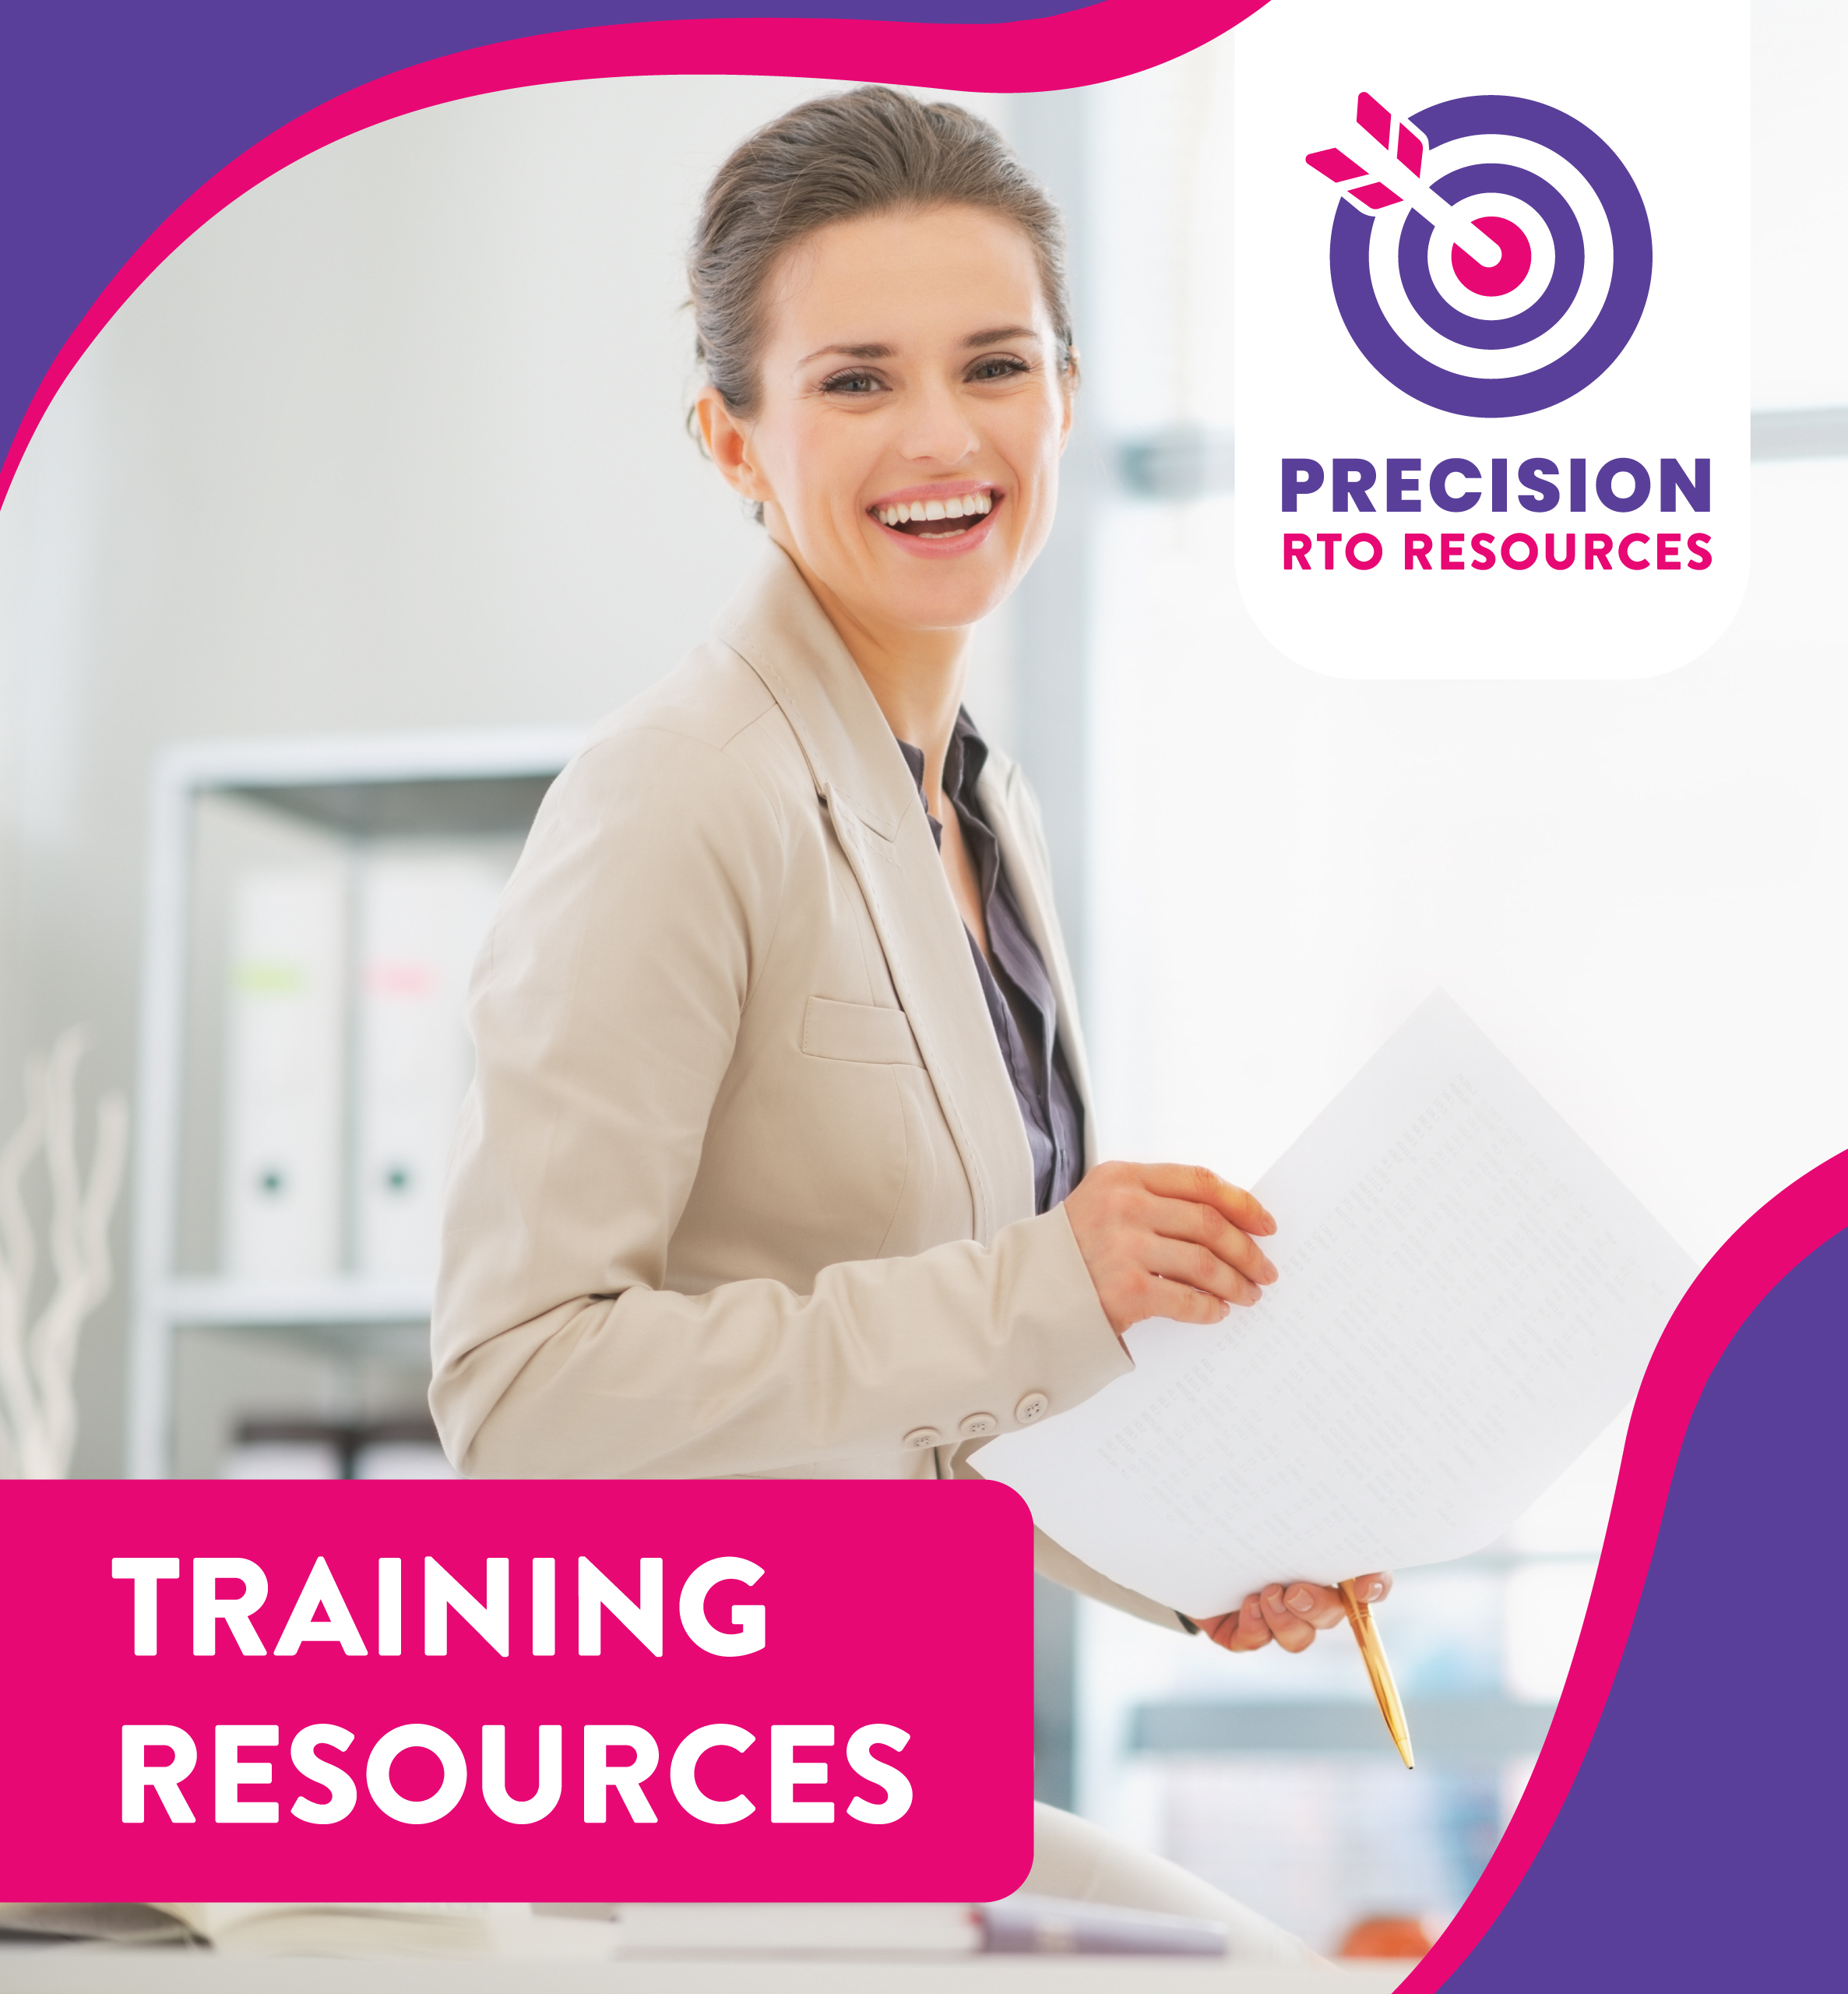 precision rto resources for training and learning materials